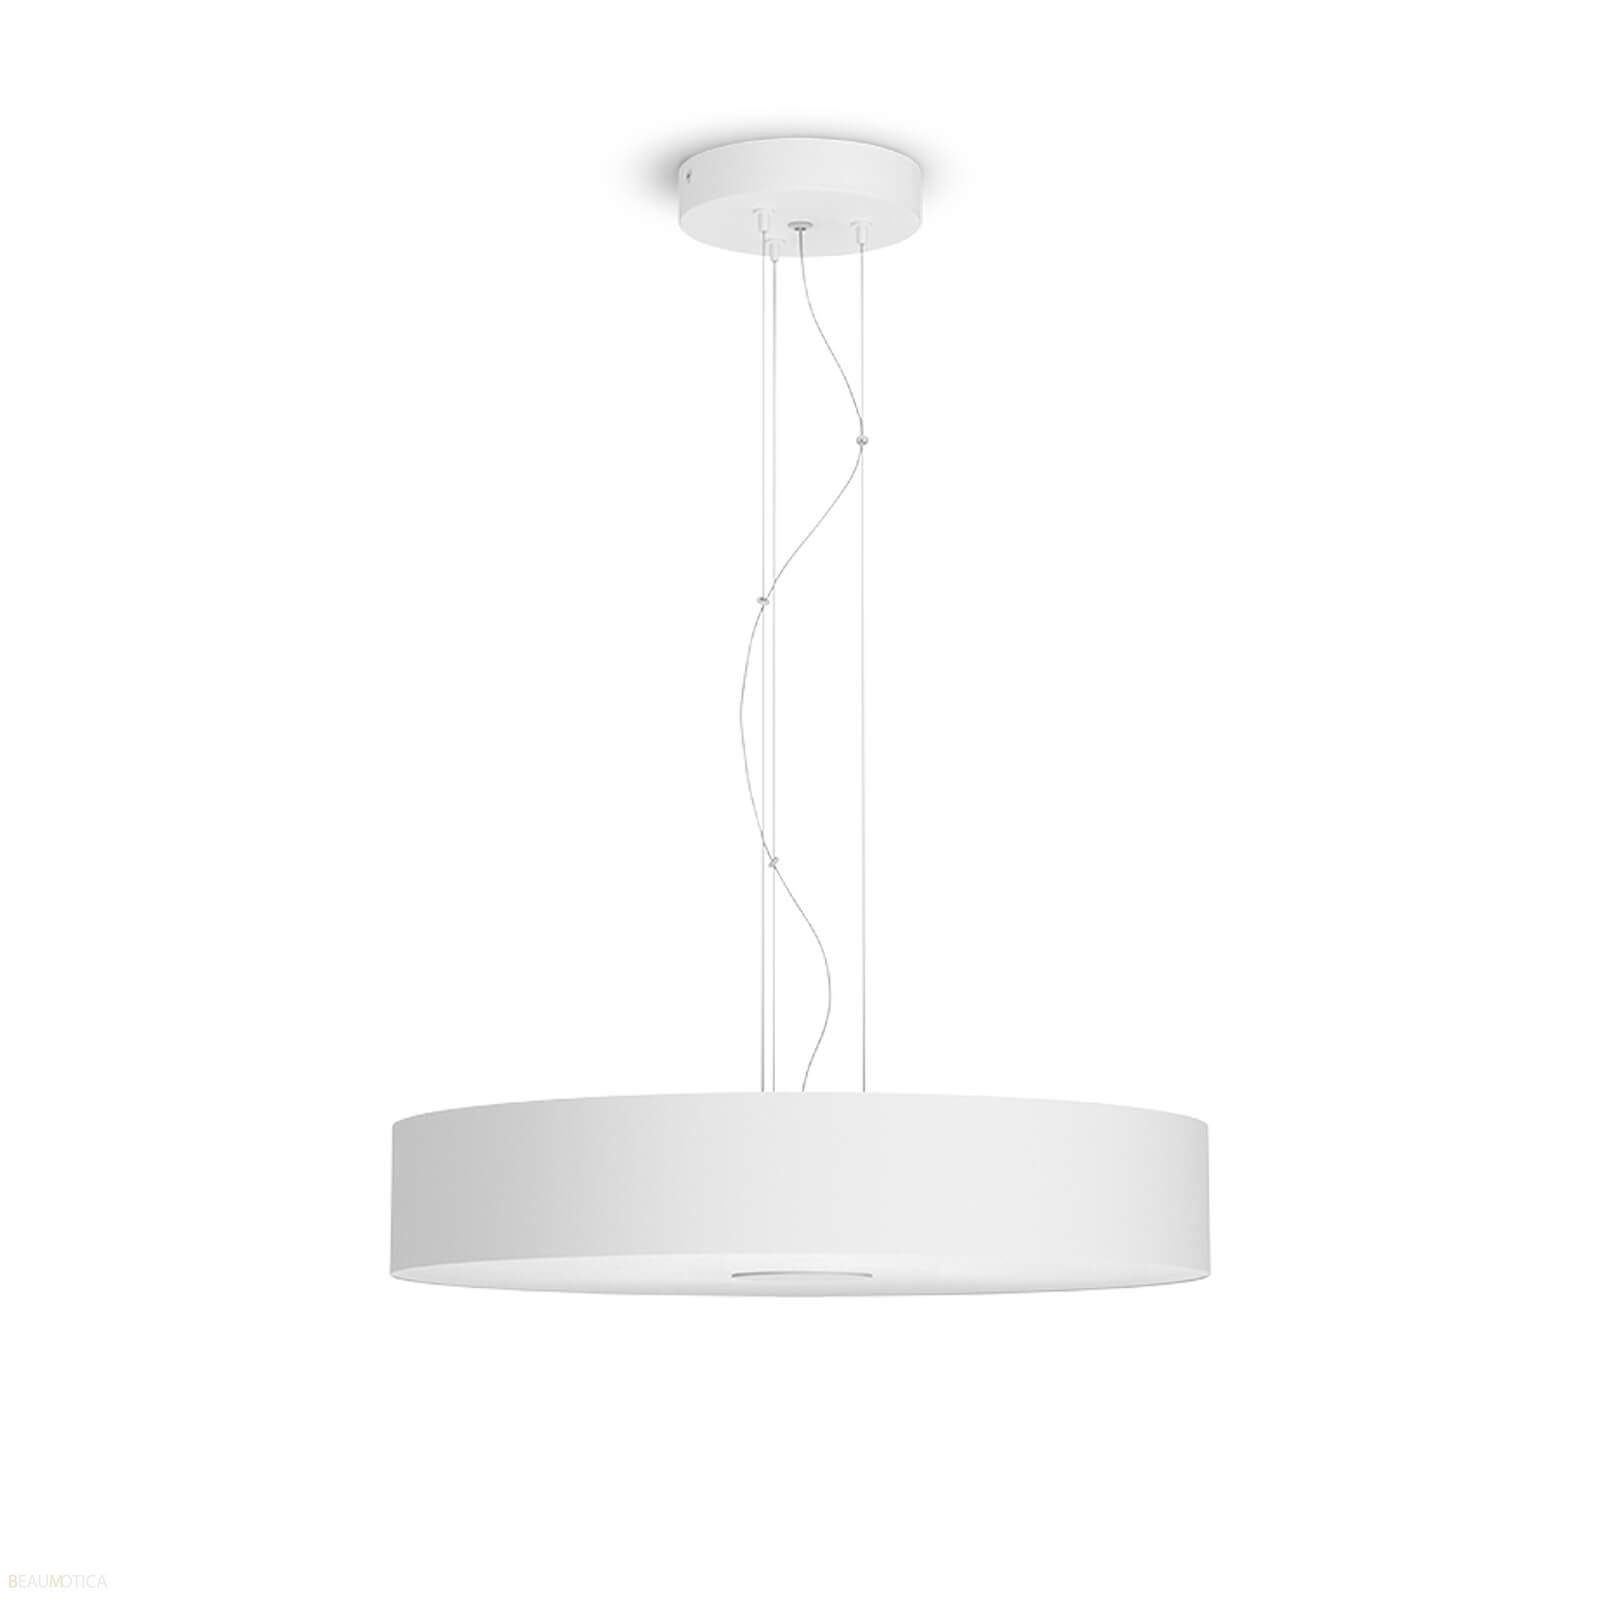 Philips Hue Fair White Ambiance Hanglamp Wit